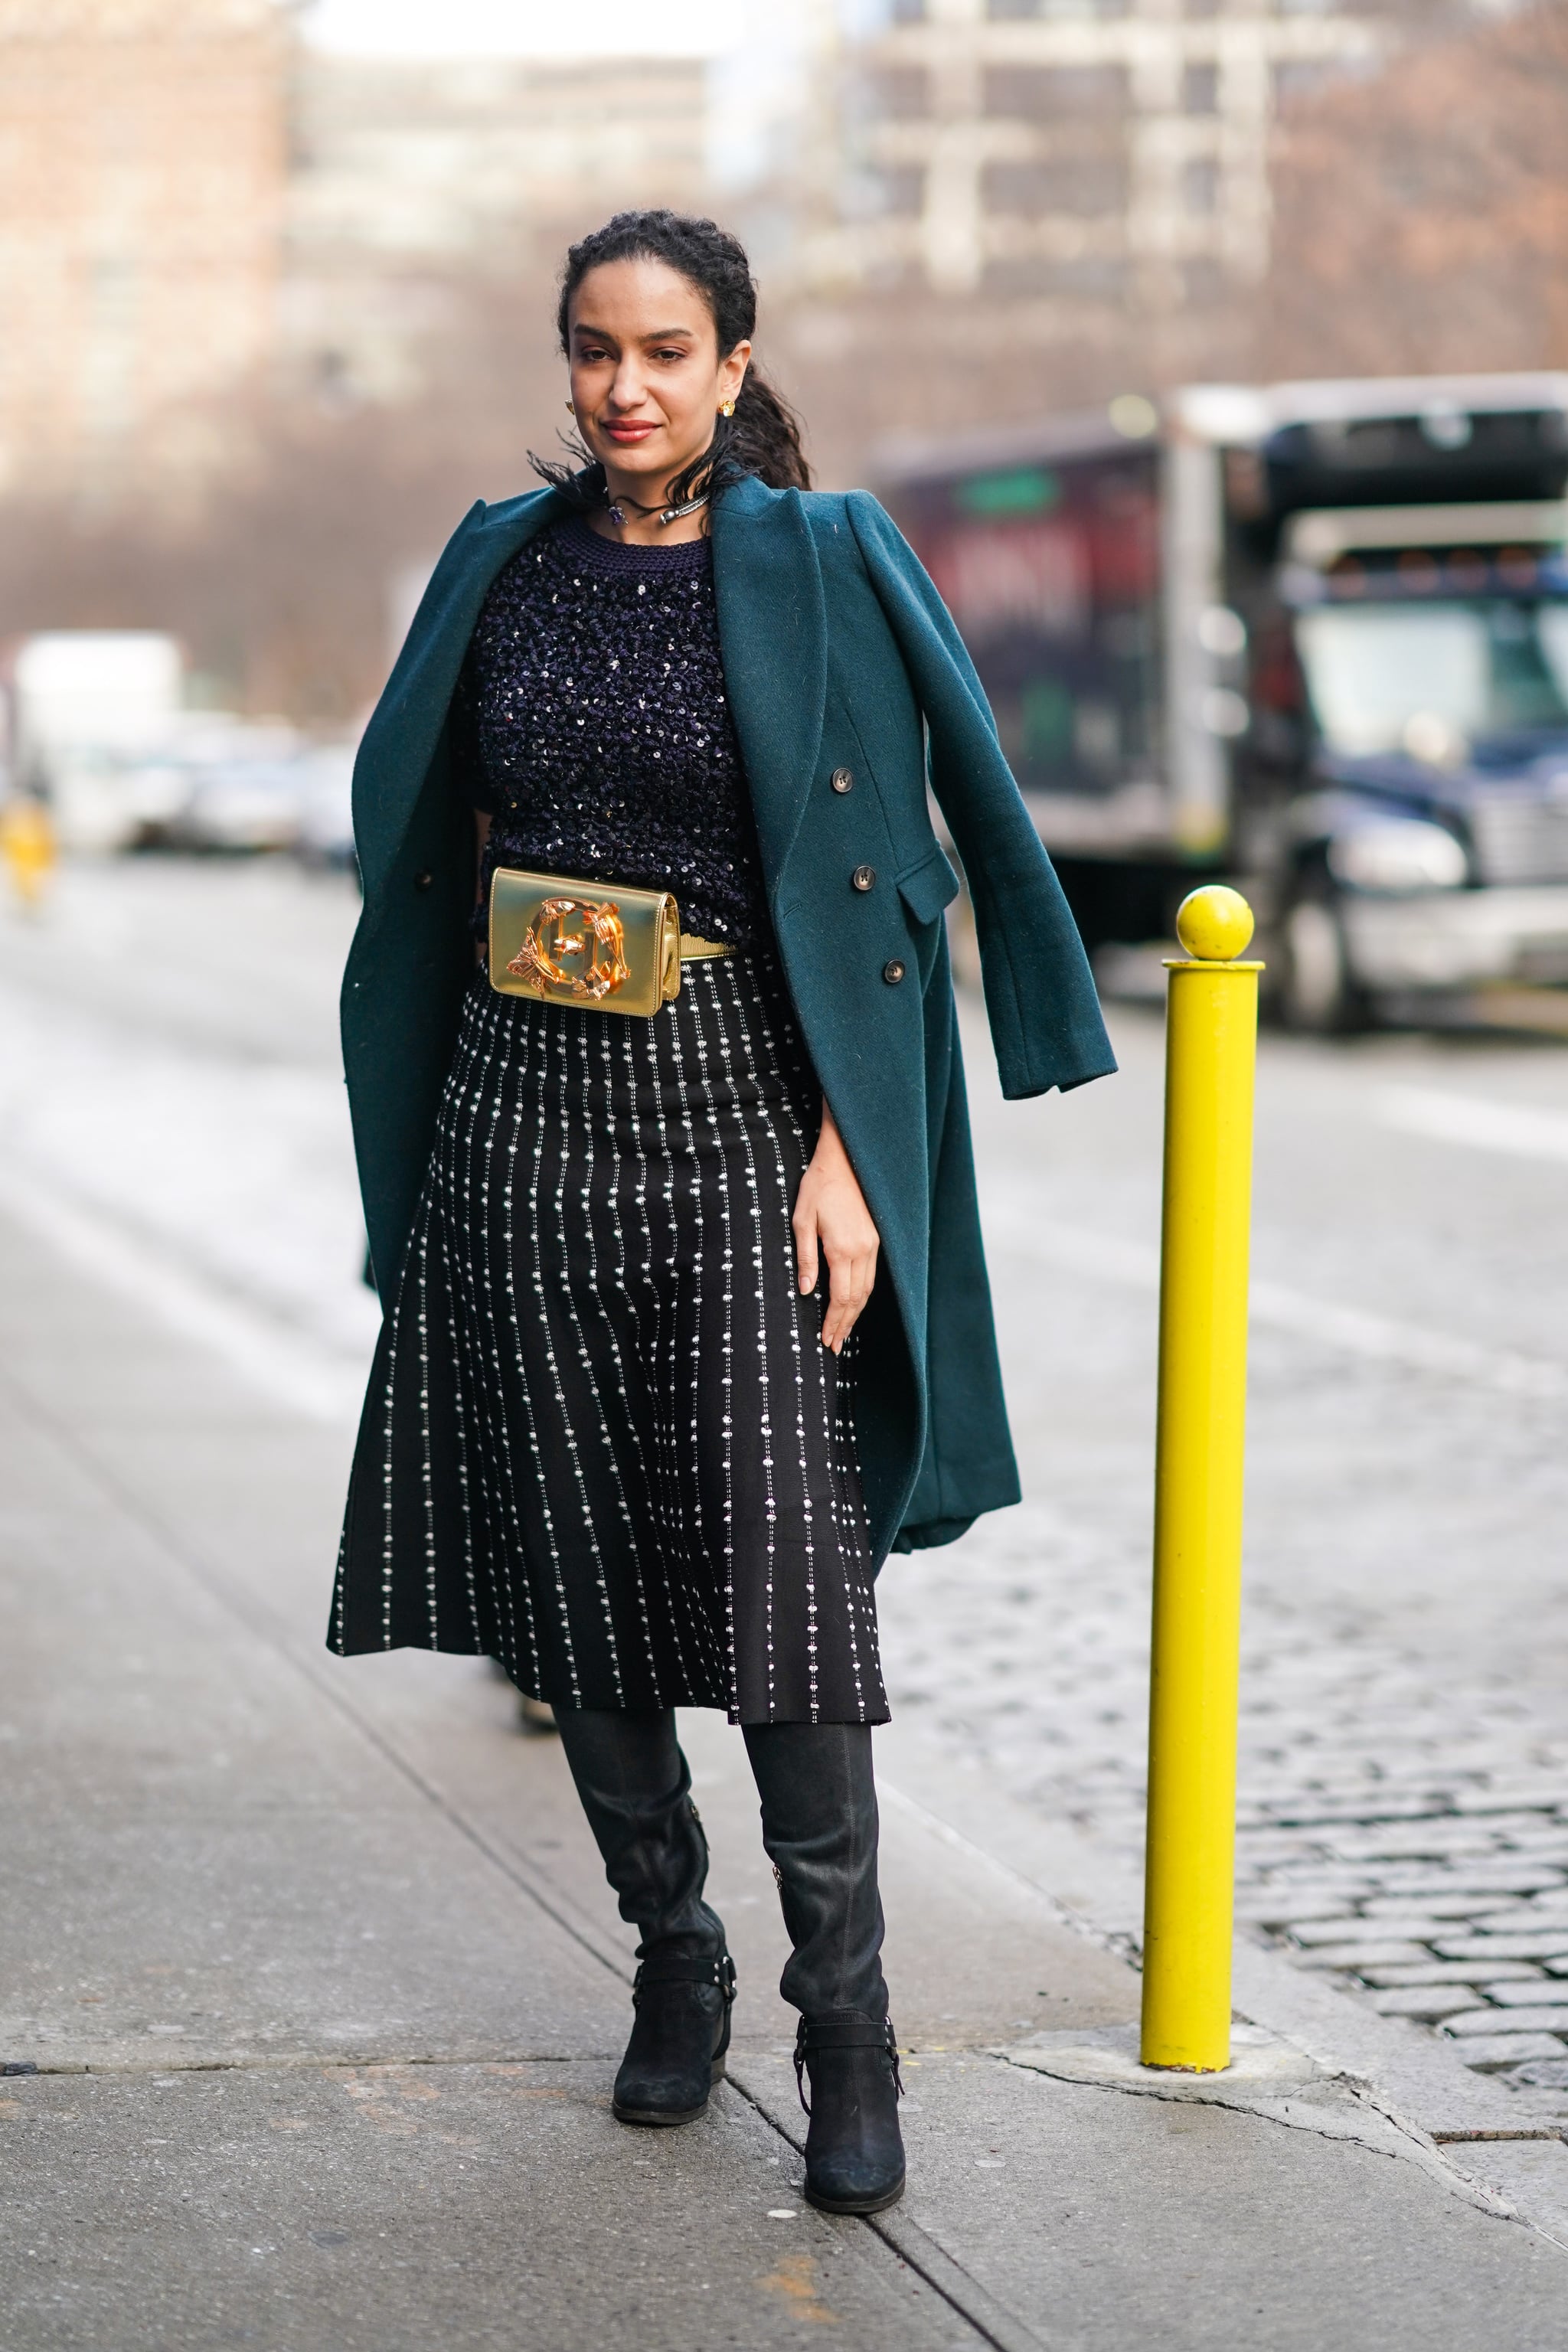 How to Wear a Belt, Outfit Ideas